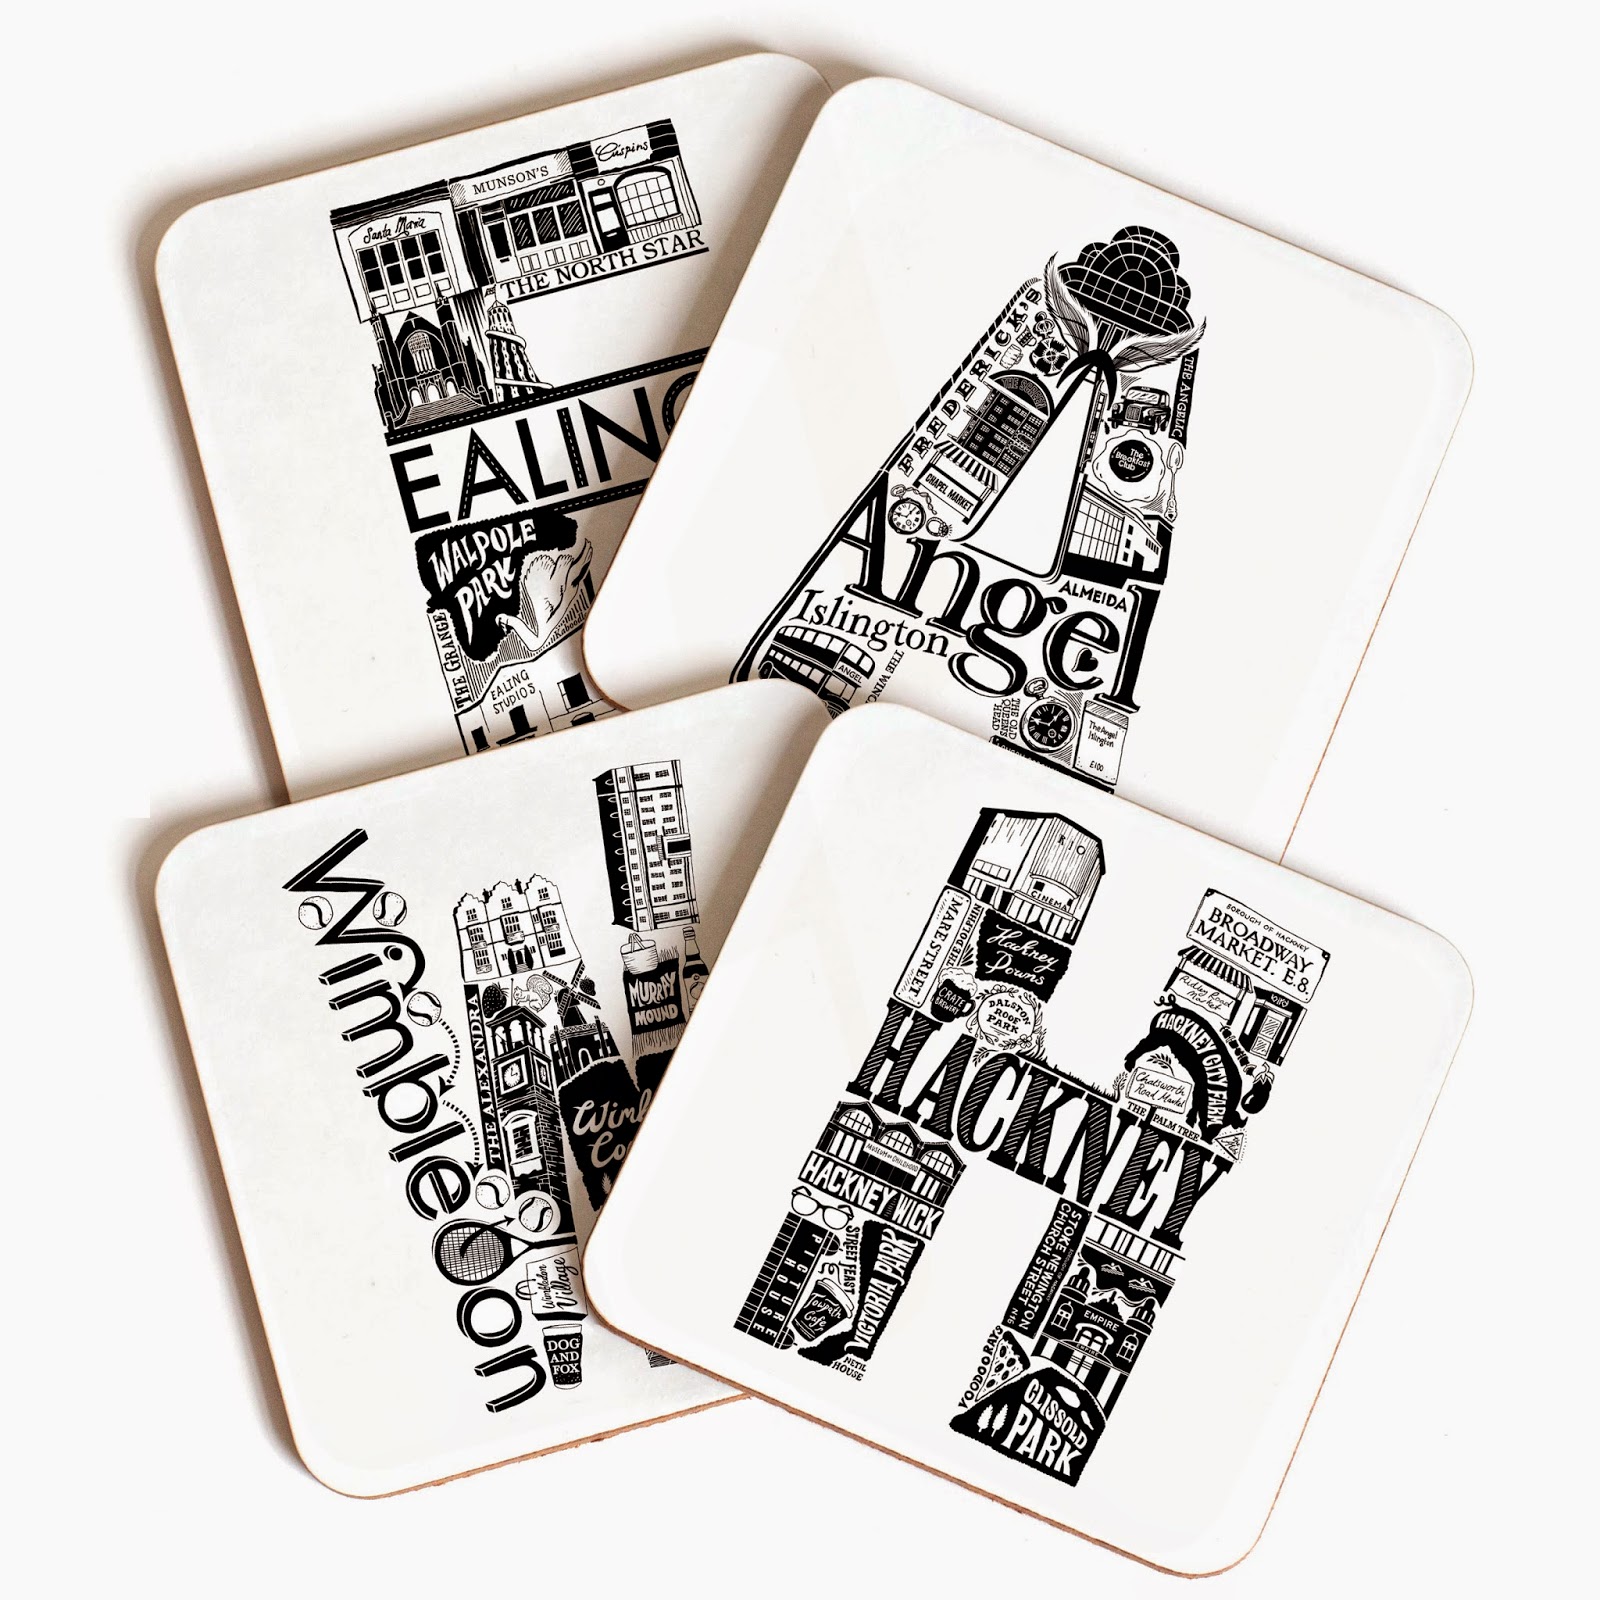 http://www.lucylovesthis.com/ourshop/prod_3447090-London-Letter-Area-Coaster.html